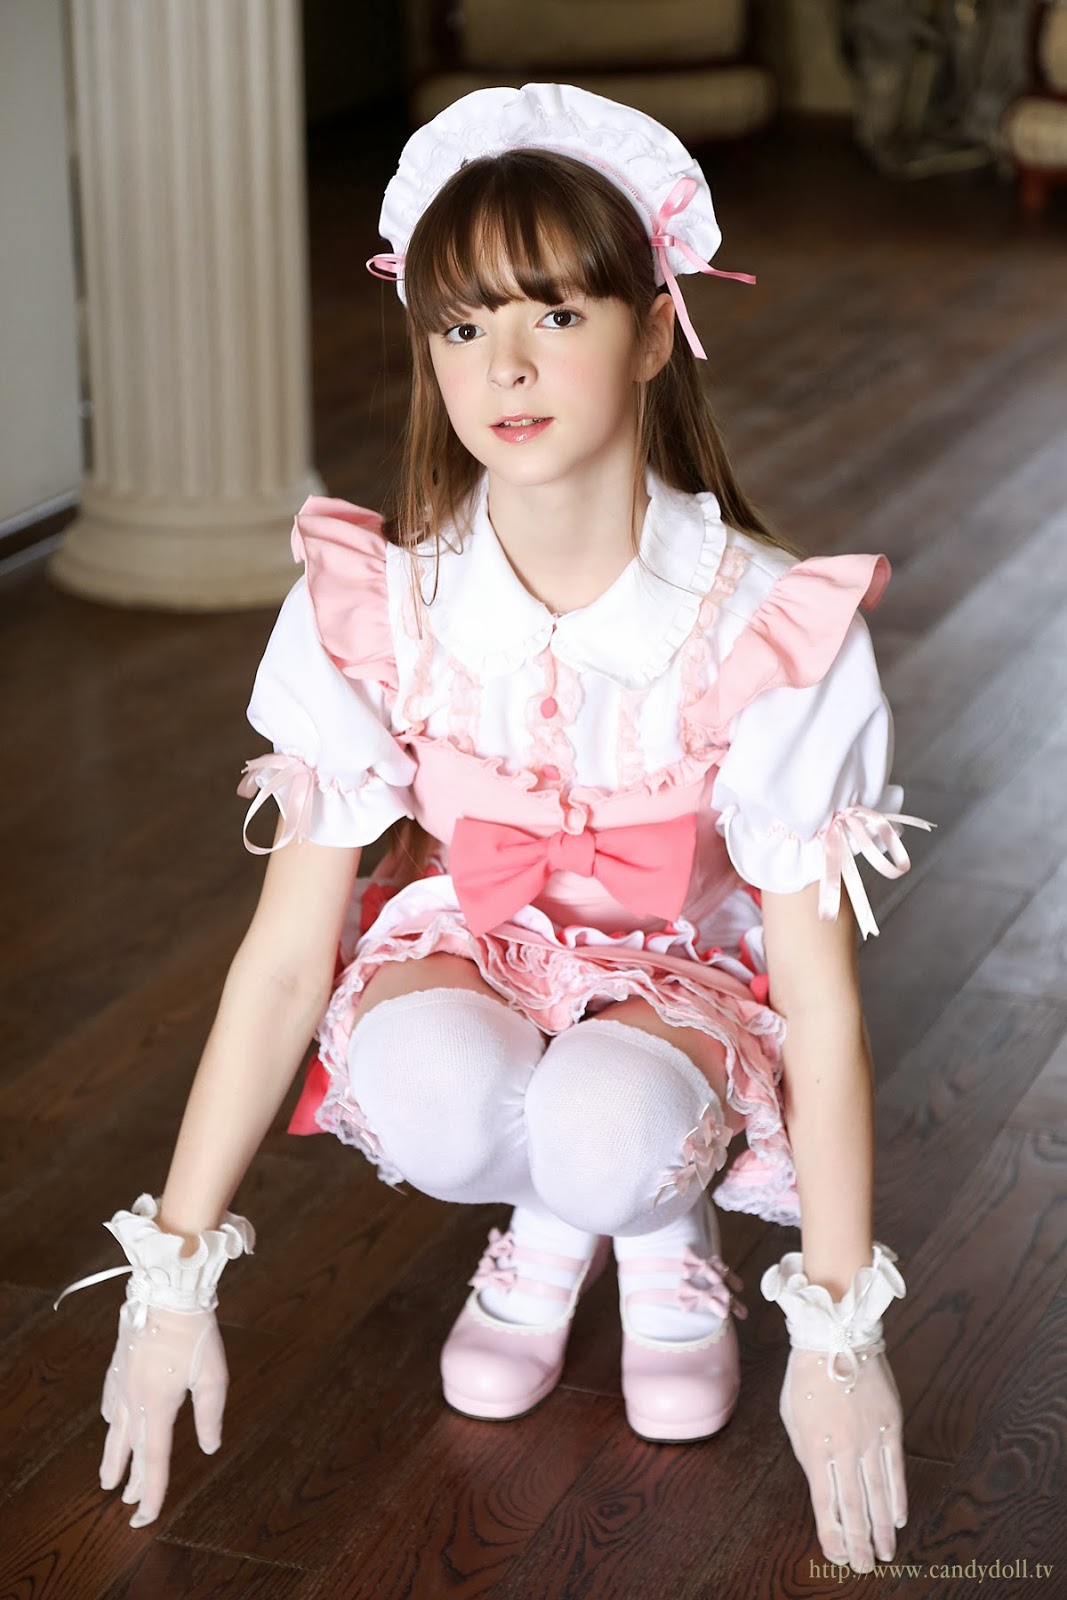 Candydoll Tv Eva R Candydoll Eva Images And Photos Finder